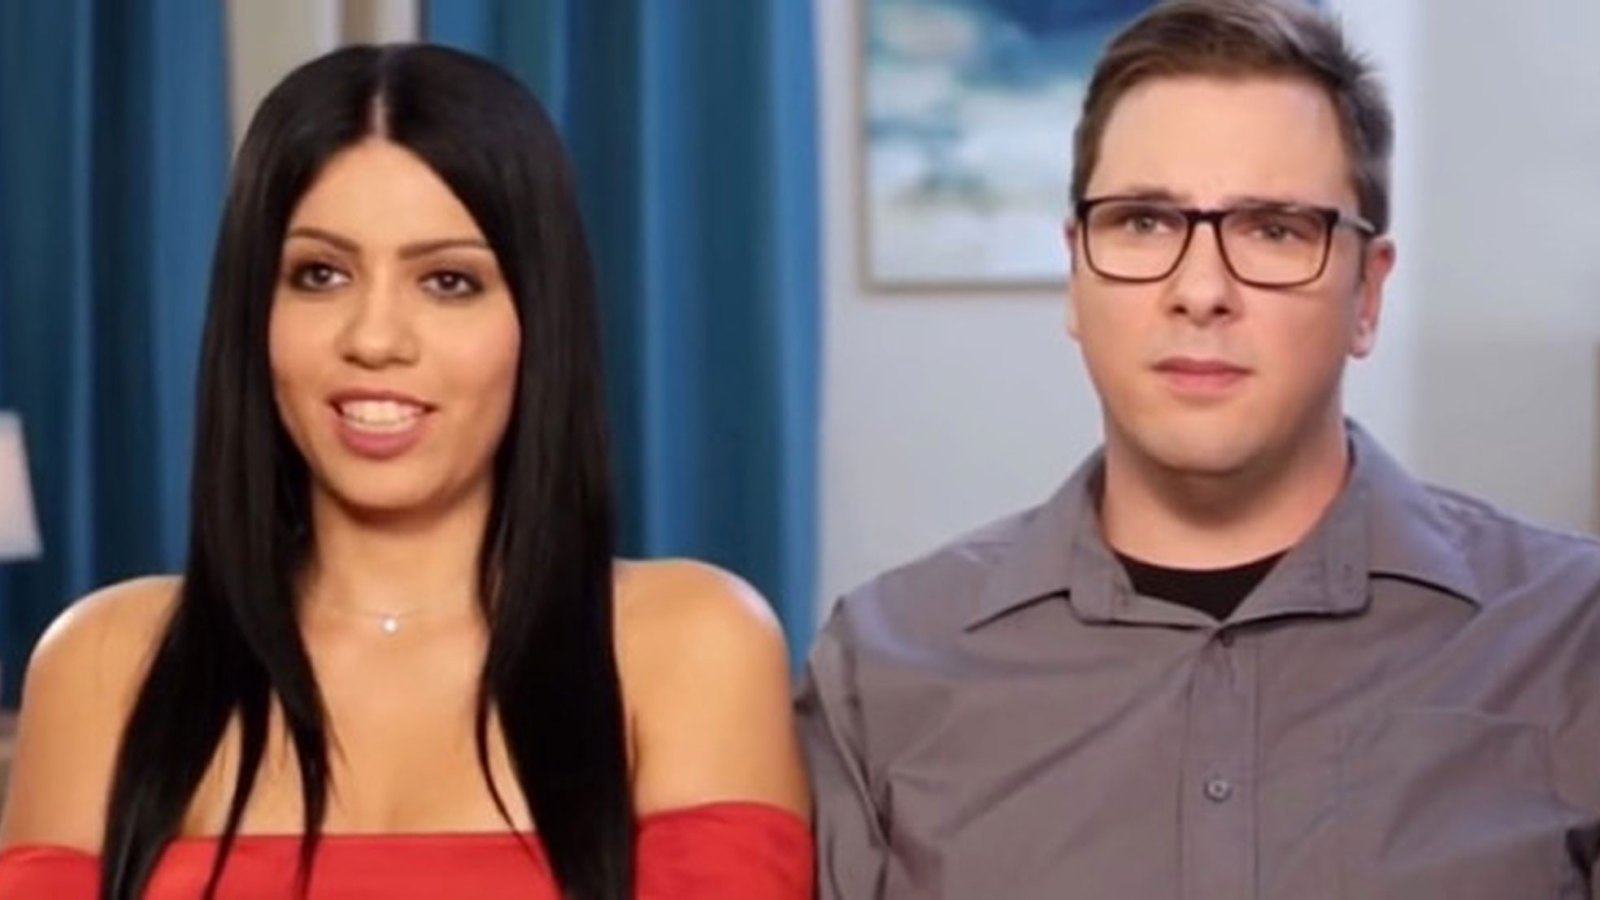 90 Day Fiance’s Larissa Dos Santos Lima Charged With Domestic Violence After Attacking Colt Johnson